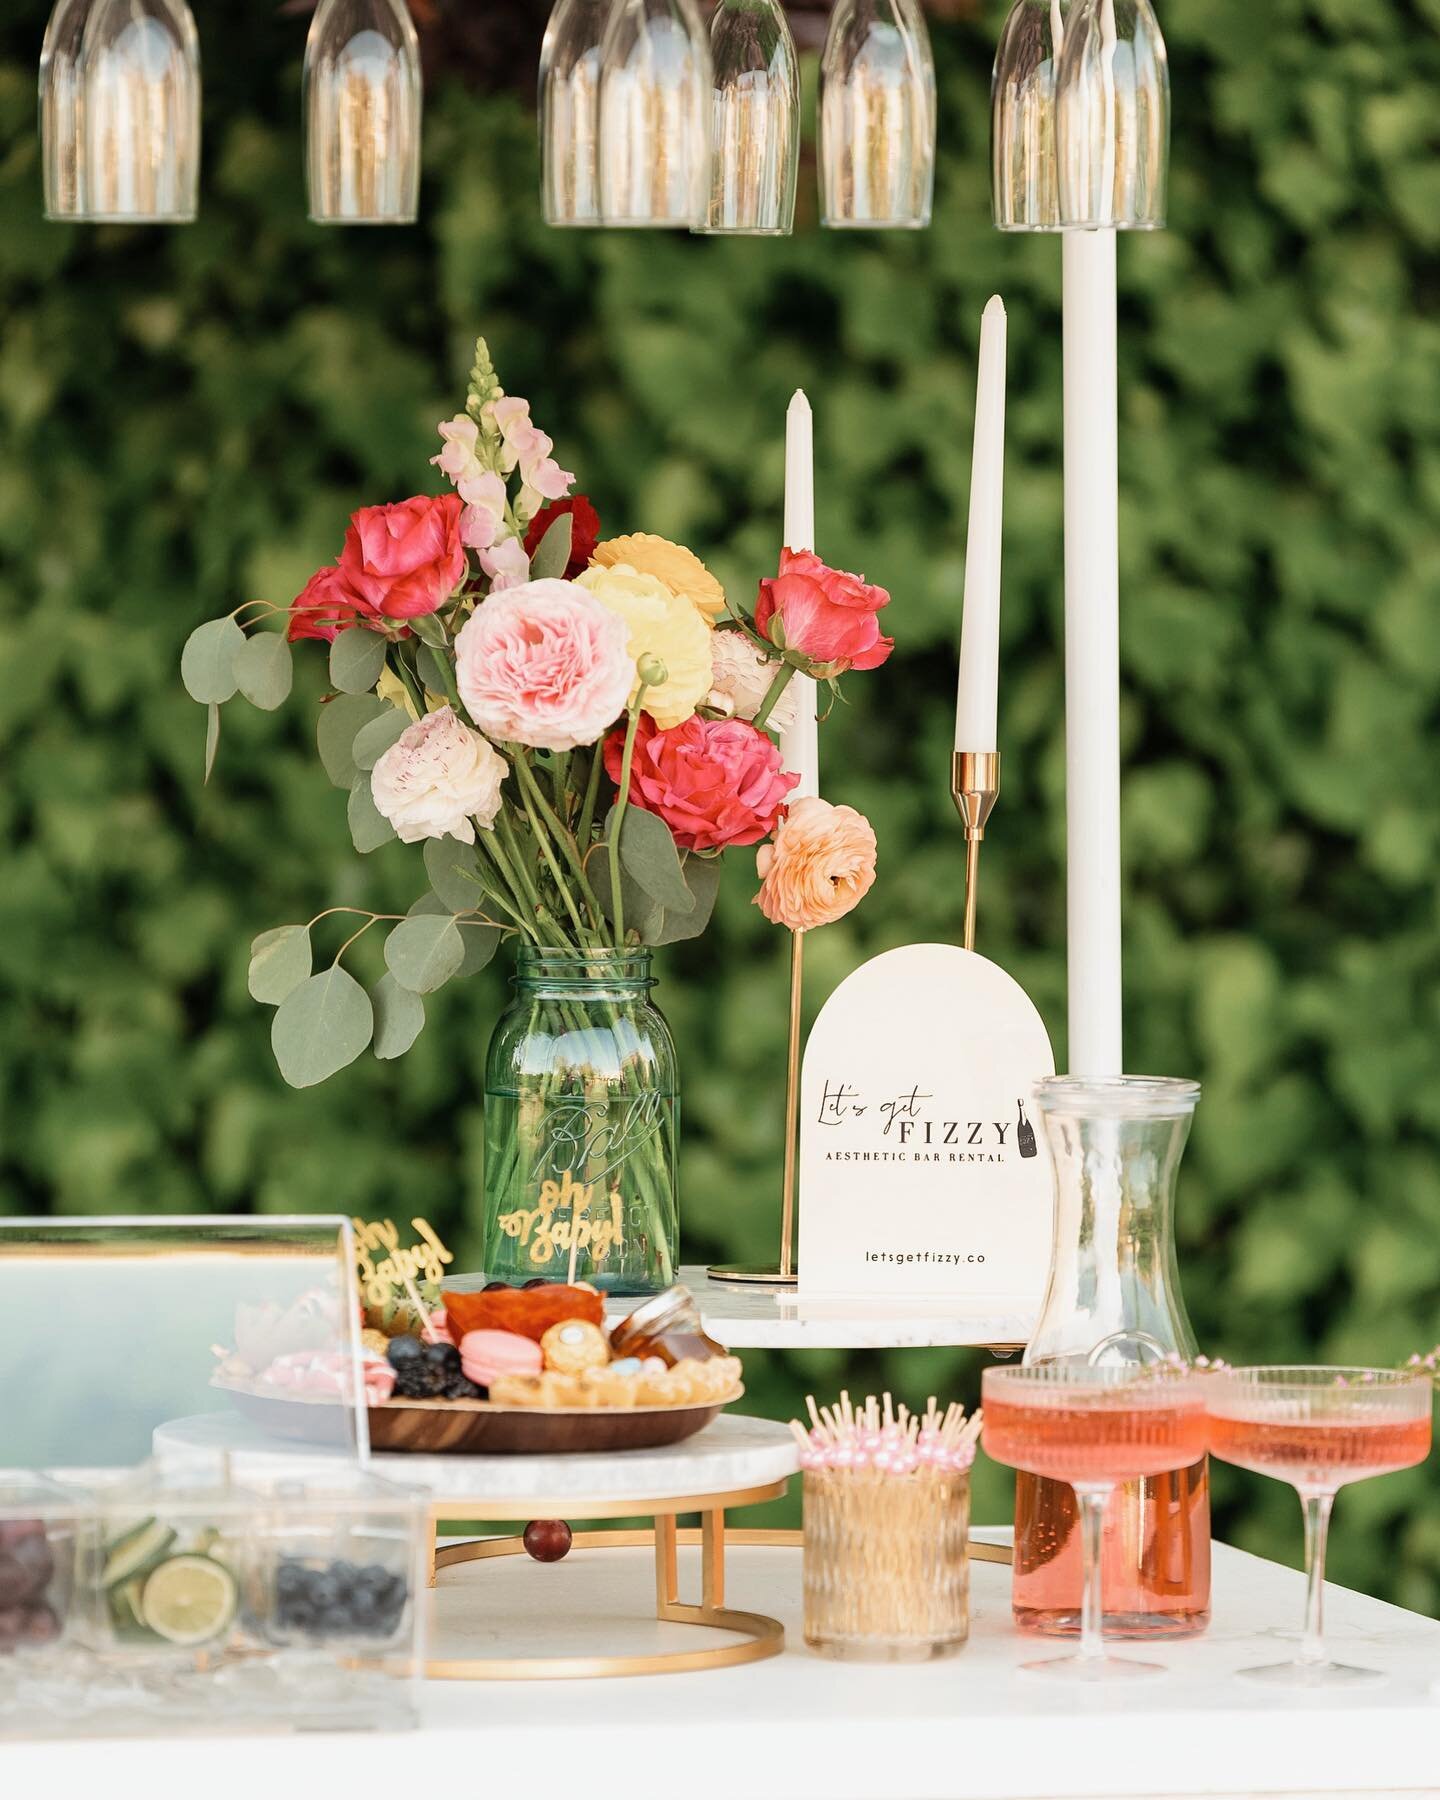 We love a good setup 🙌🏼

Be sure to checkout the amazing businesses that helped spiced up our cart up a bit more ✨ Book them for your next event! 

Floral @blooms.by.bailey.g 
Charcuterie @oakandroses_charcuterie 
Photographer @roaminrog